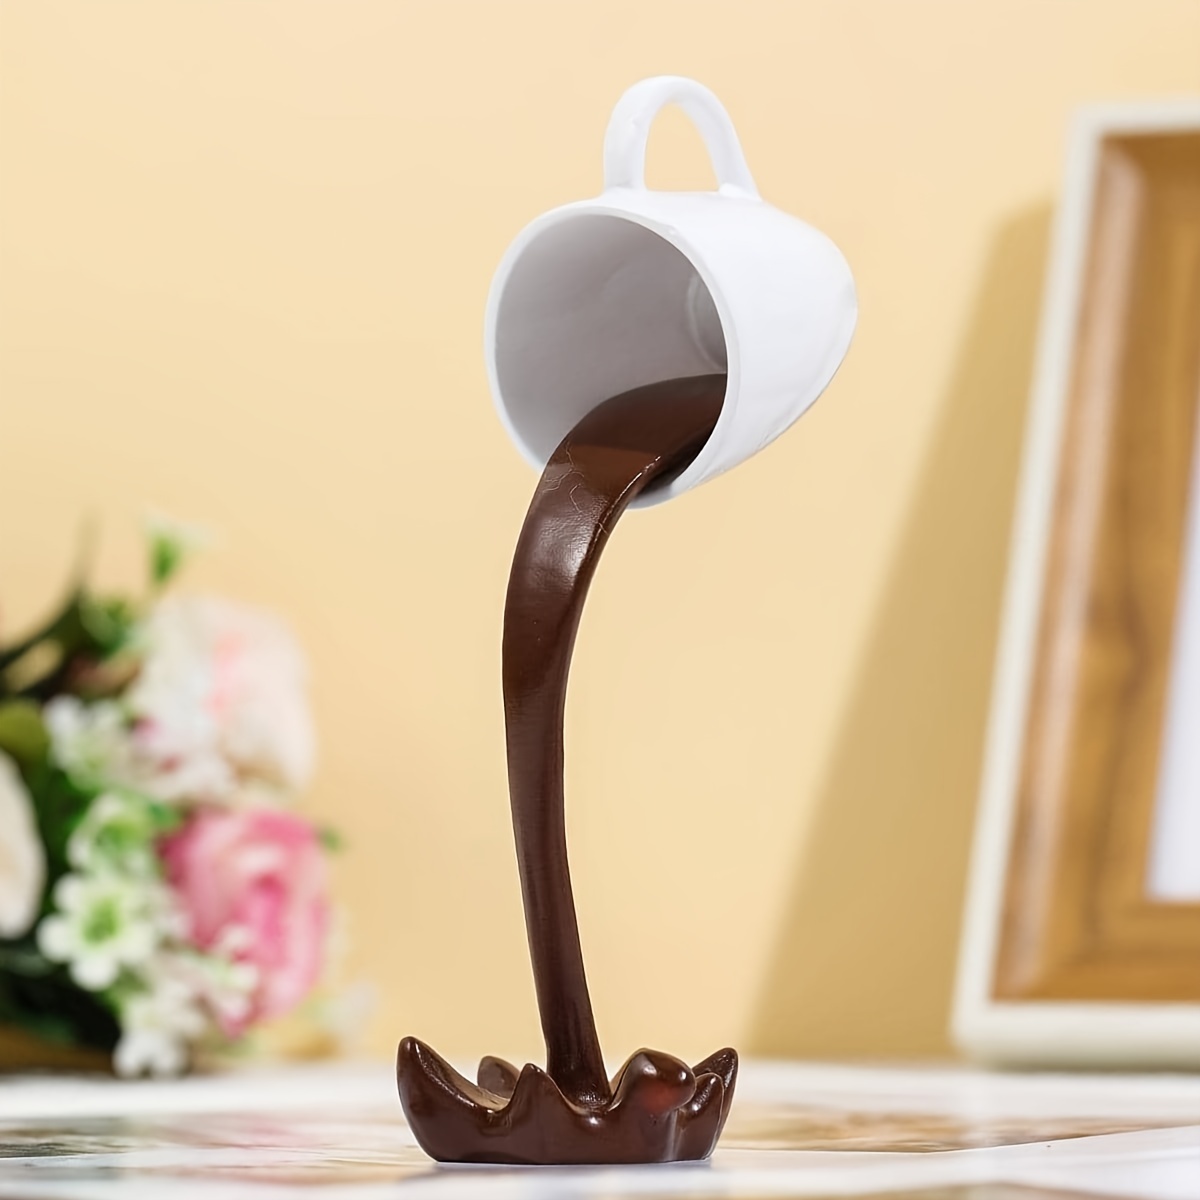 Floating Coffee Cup Sculpture